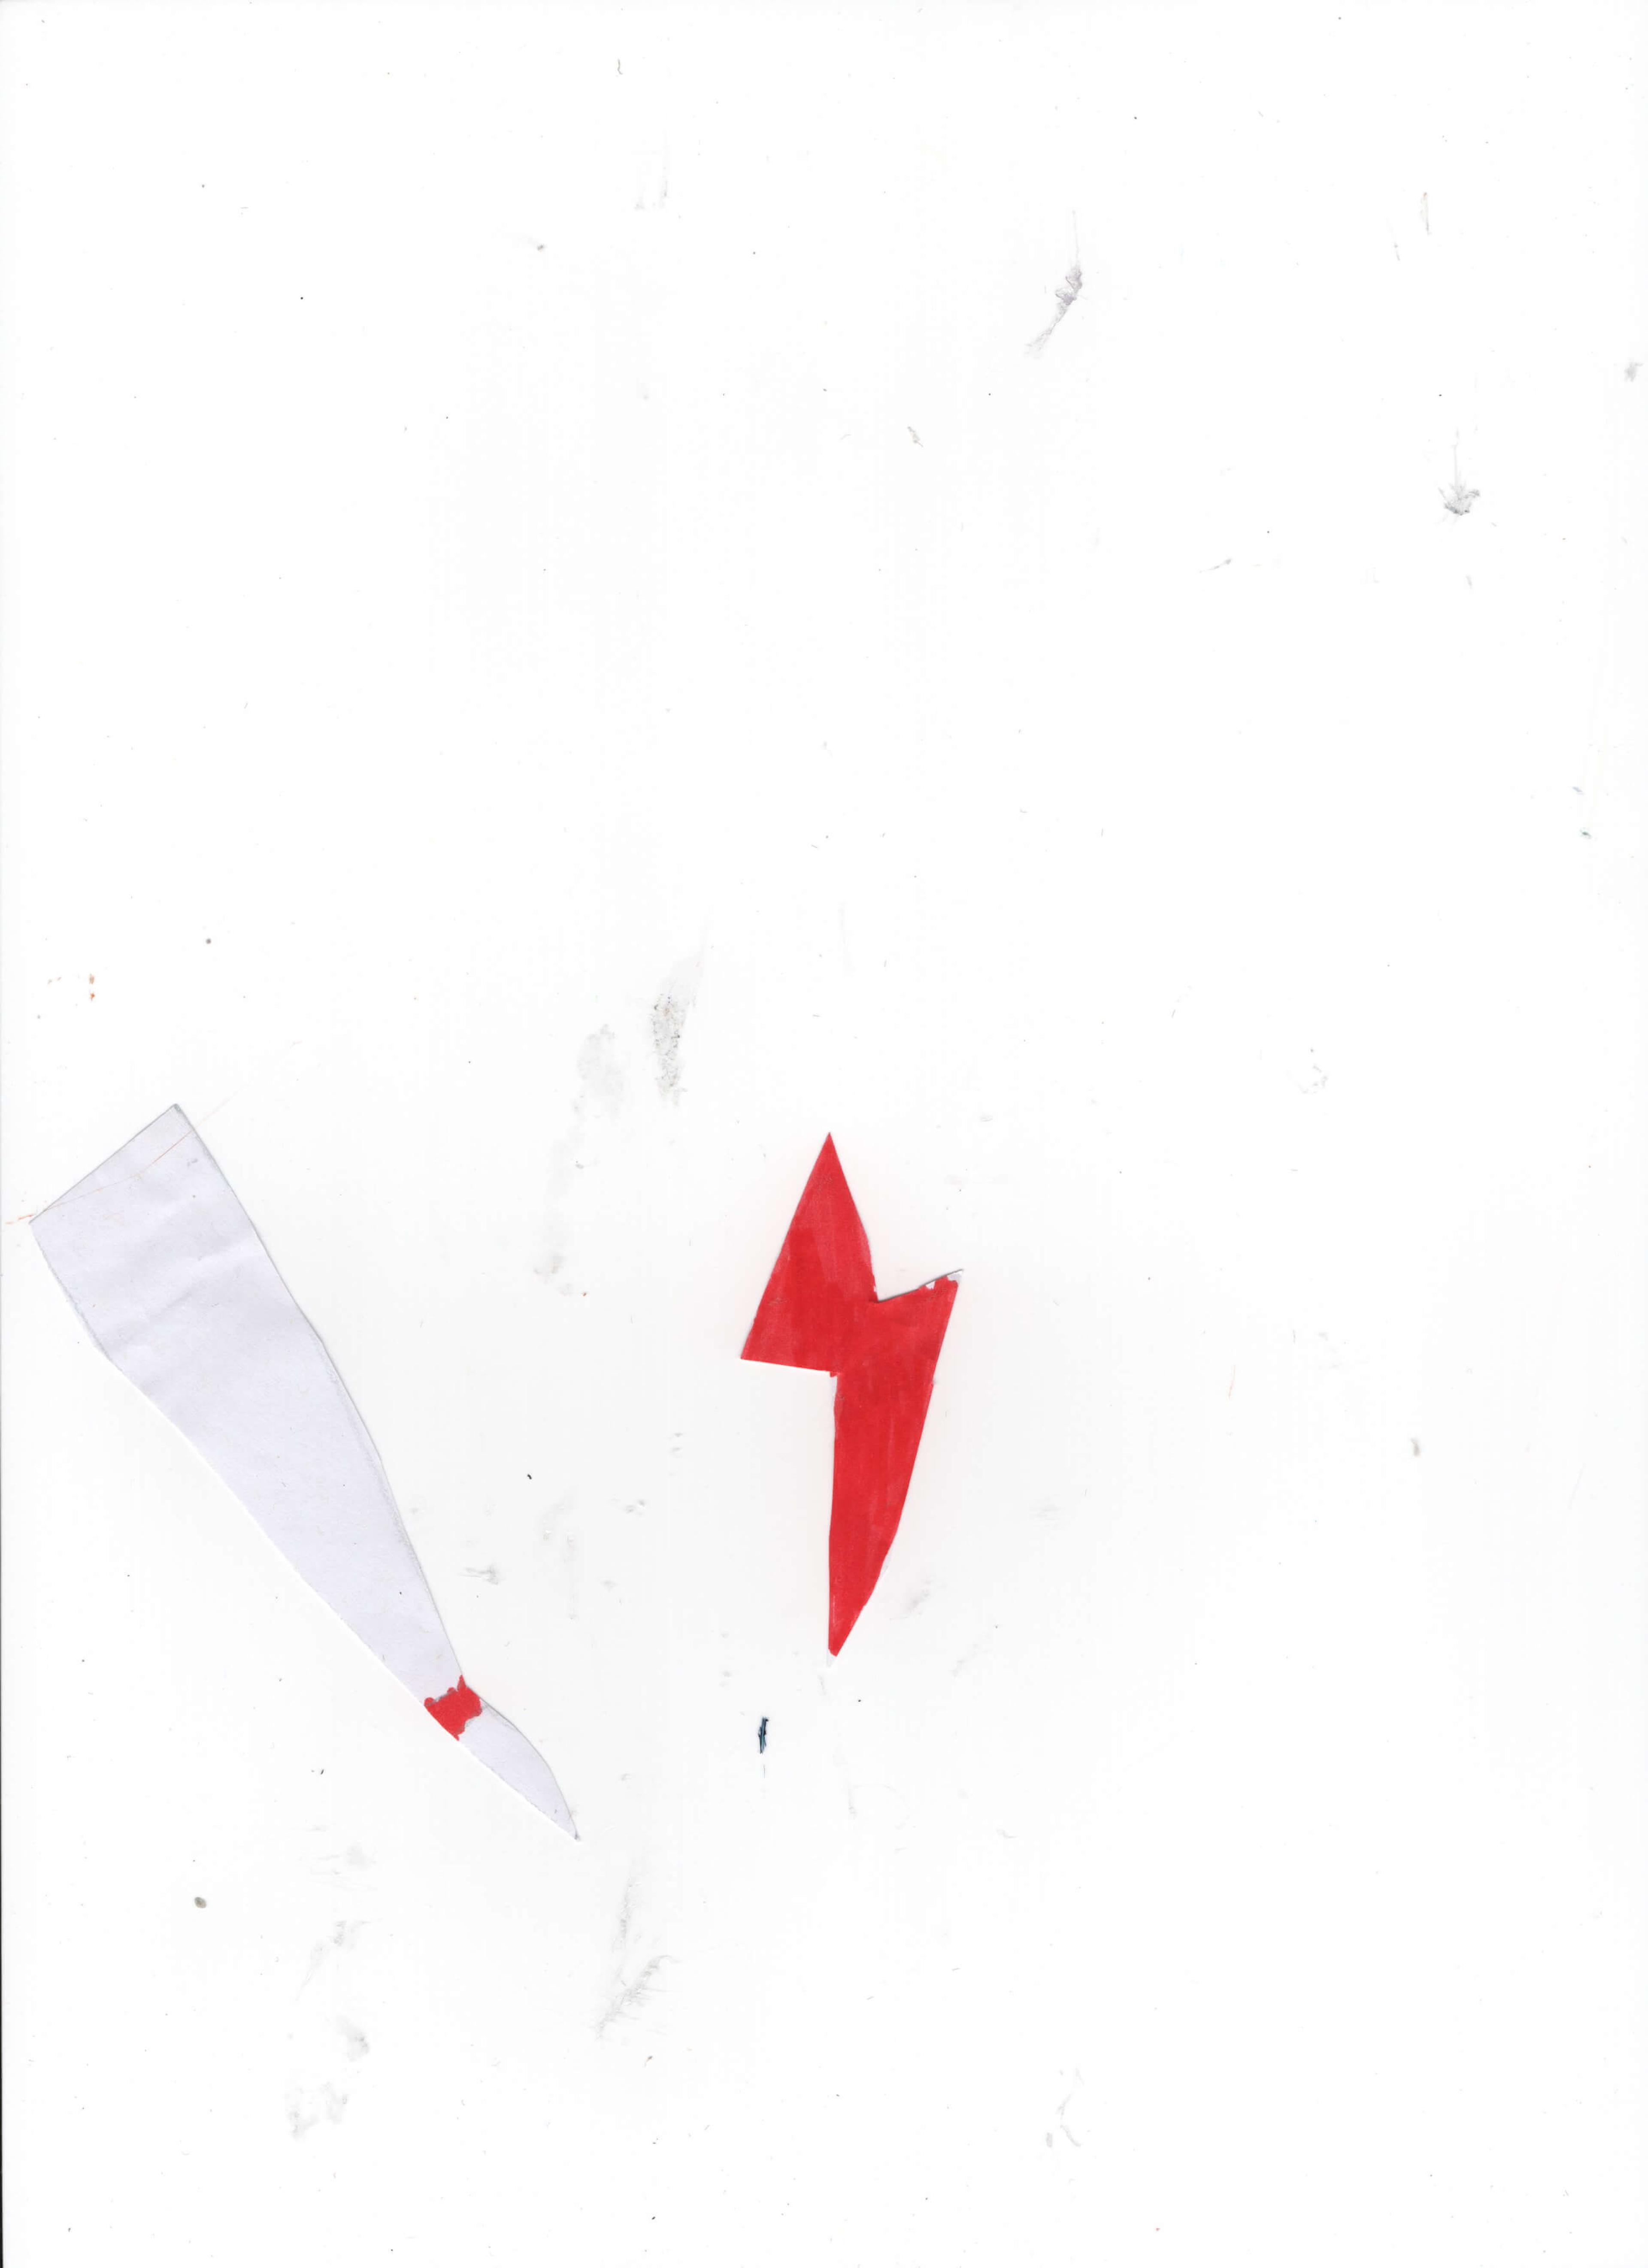 Paper cut-outs of a red lightning bolt and a white triangle with a red strip.